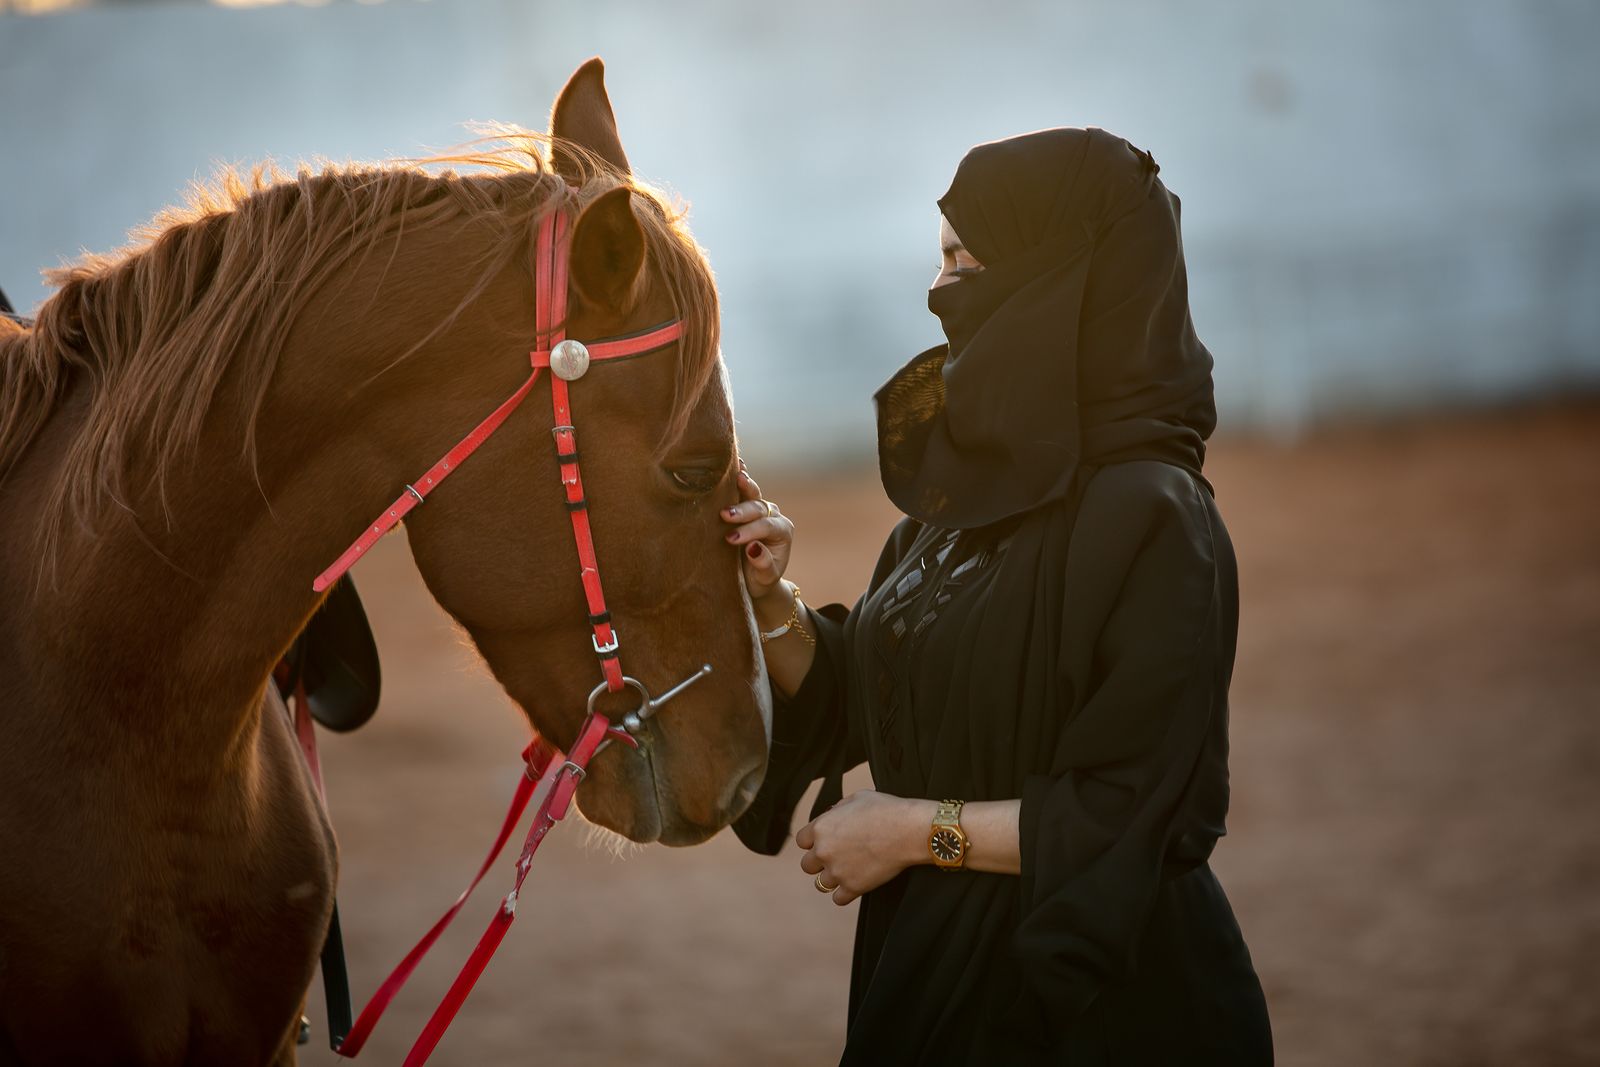 © Tasneem Alsultan - Image from the SAUDI TALES OF LOVE photography project